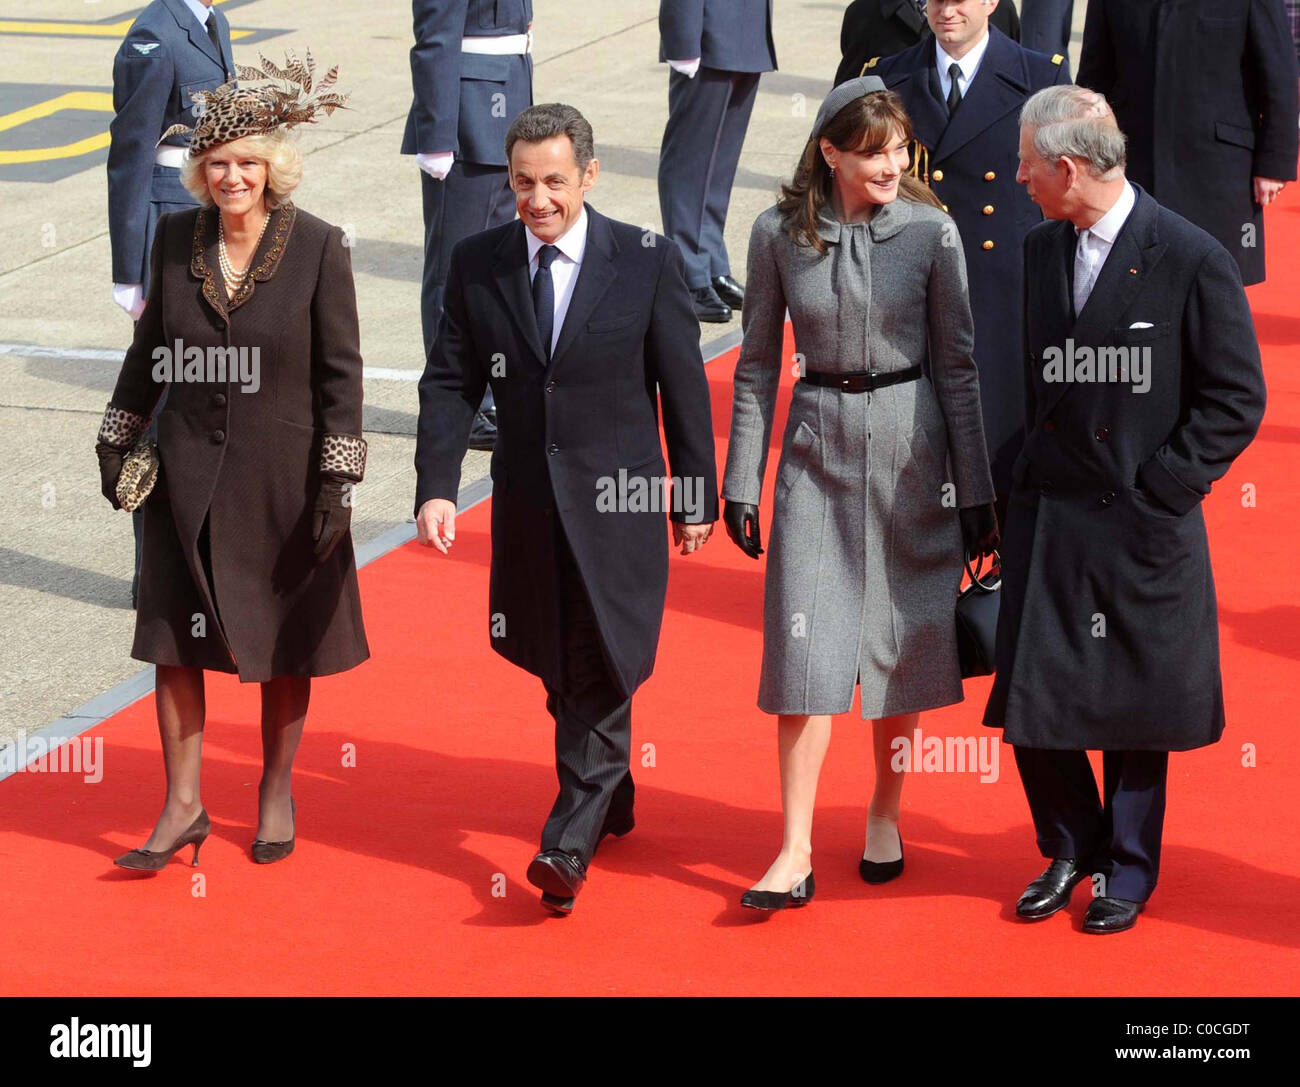 French president Nicolas Sarkozy arrives at Heathrow Airport with his wife Carla Bruni and was greeted by the Prince Charles, Stock Photo